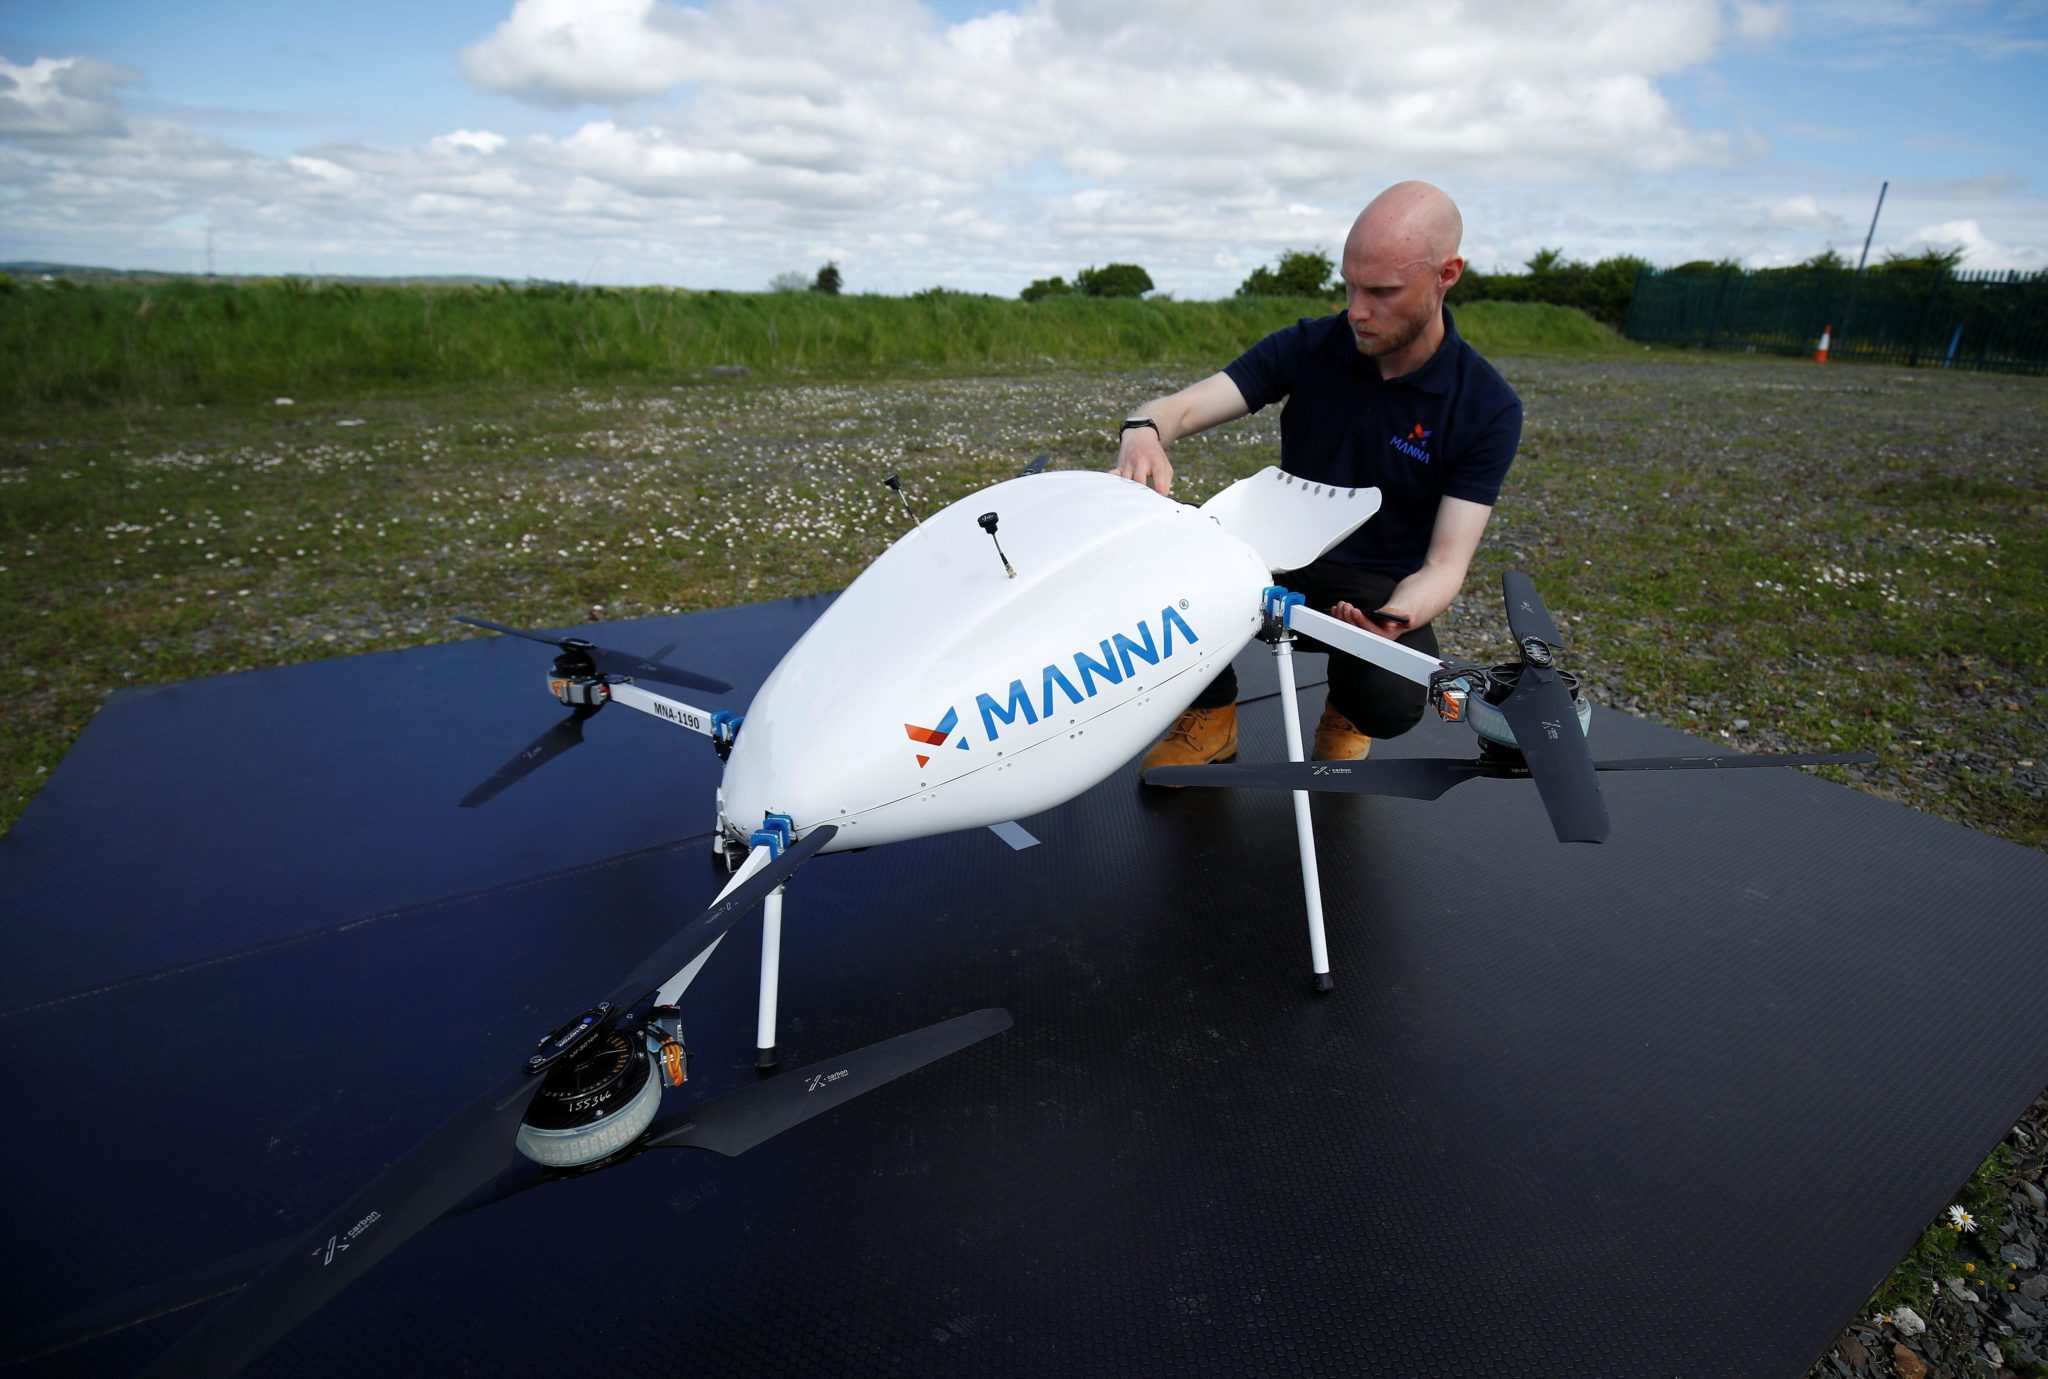 A Manna Aero drone operator loads up essential household and medical supplies for delivery. Image:  REUTERS / Alamy Stock Photo